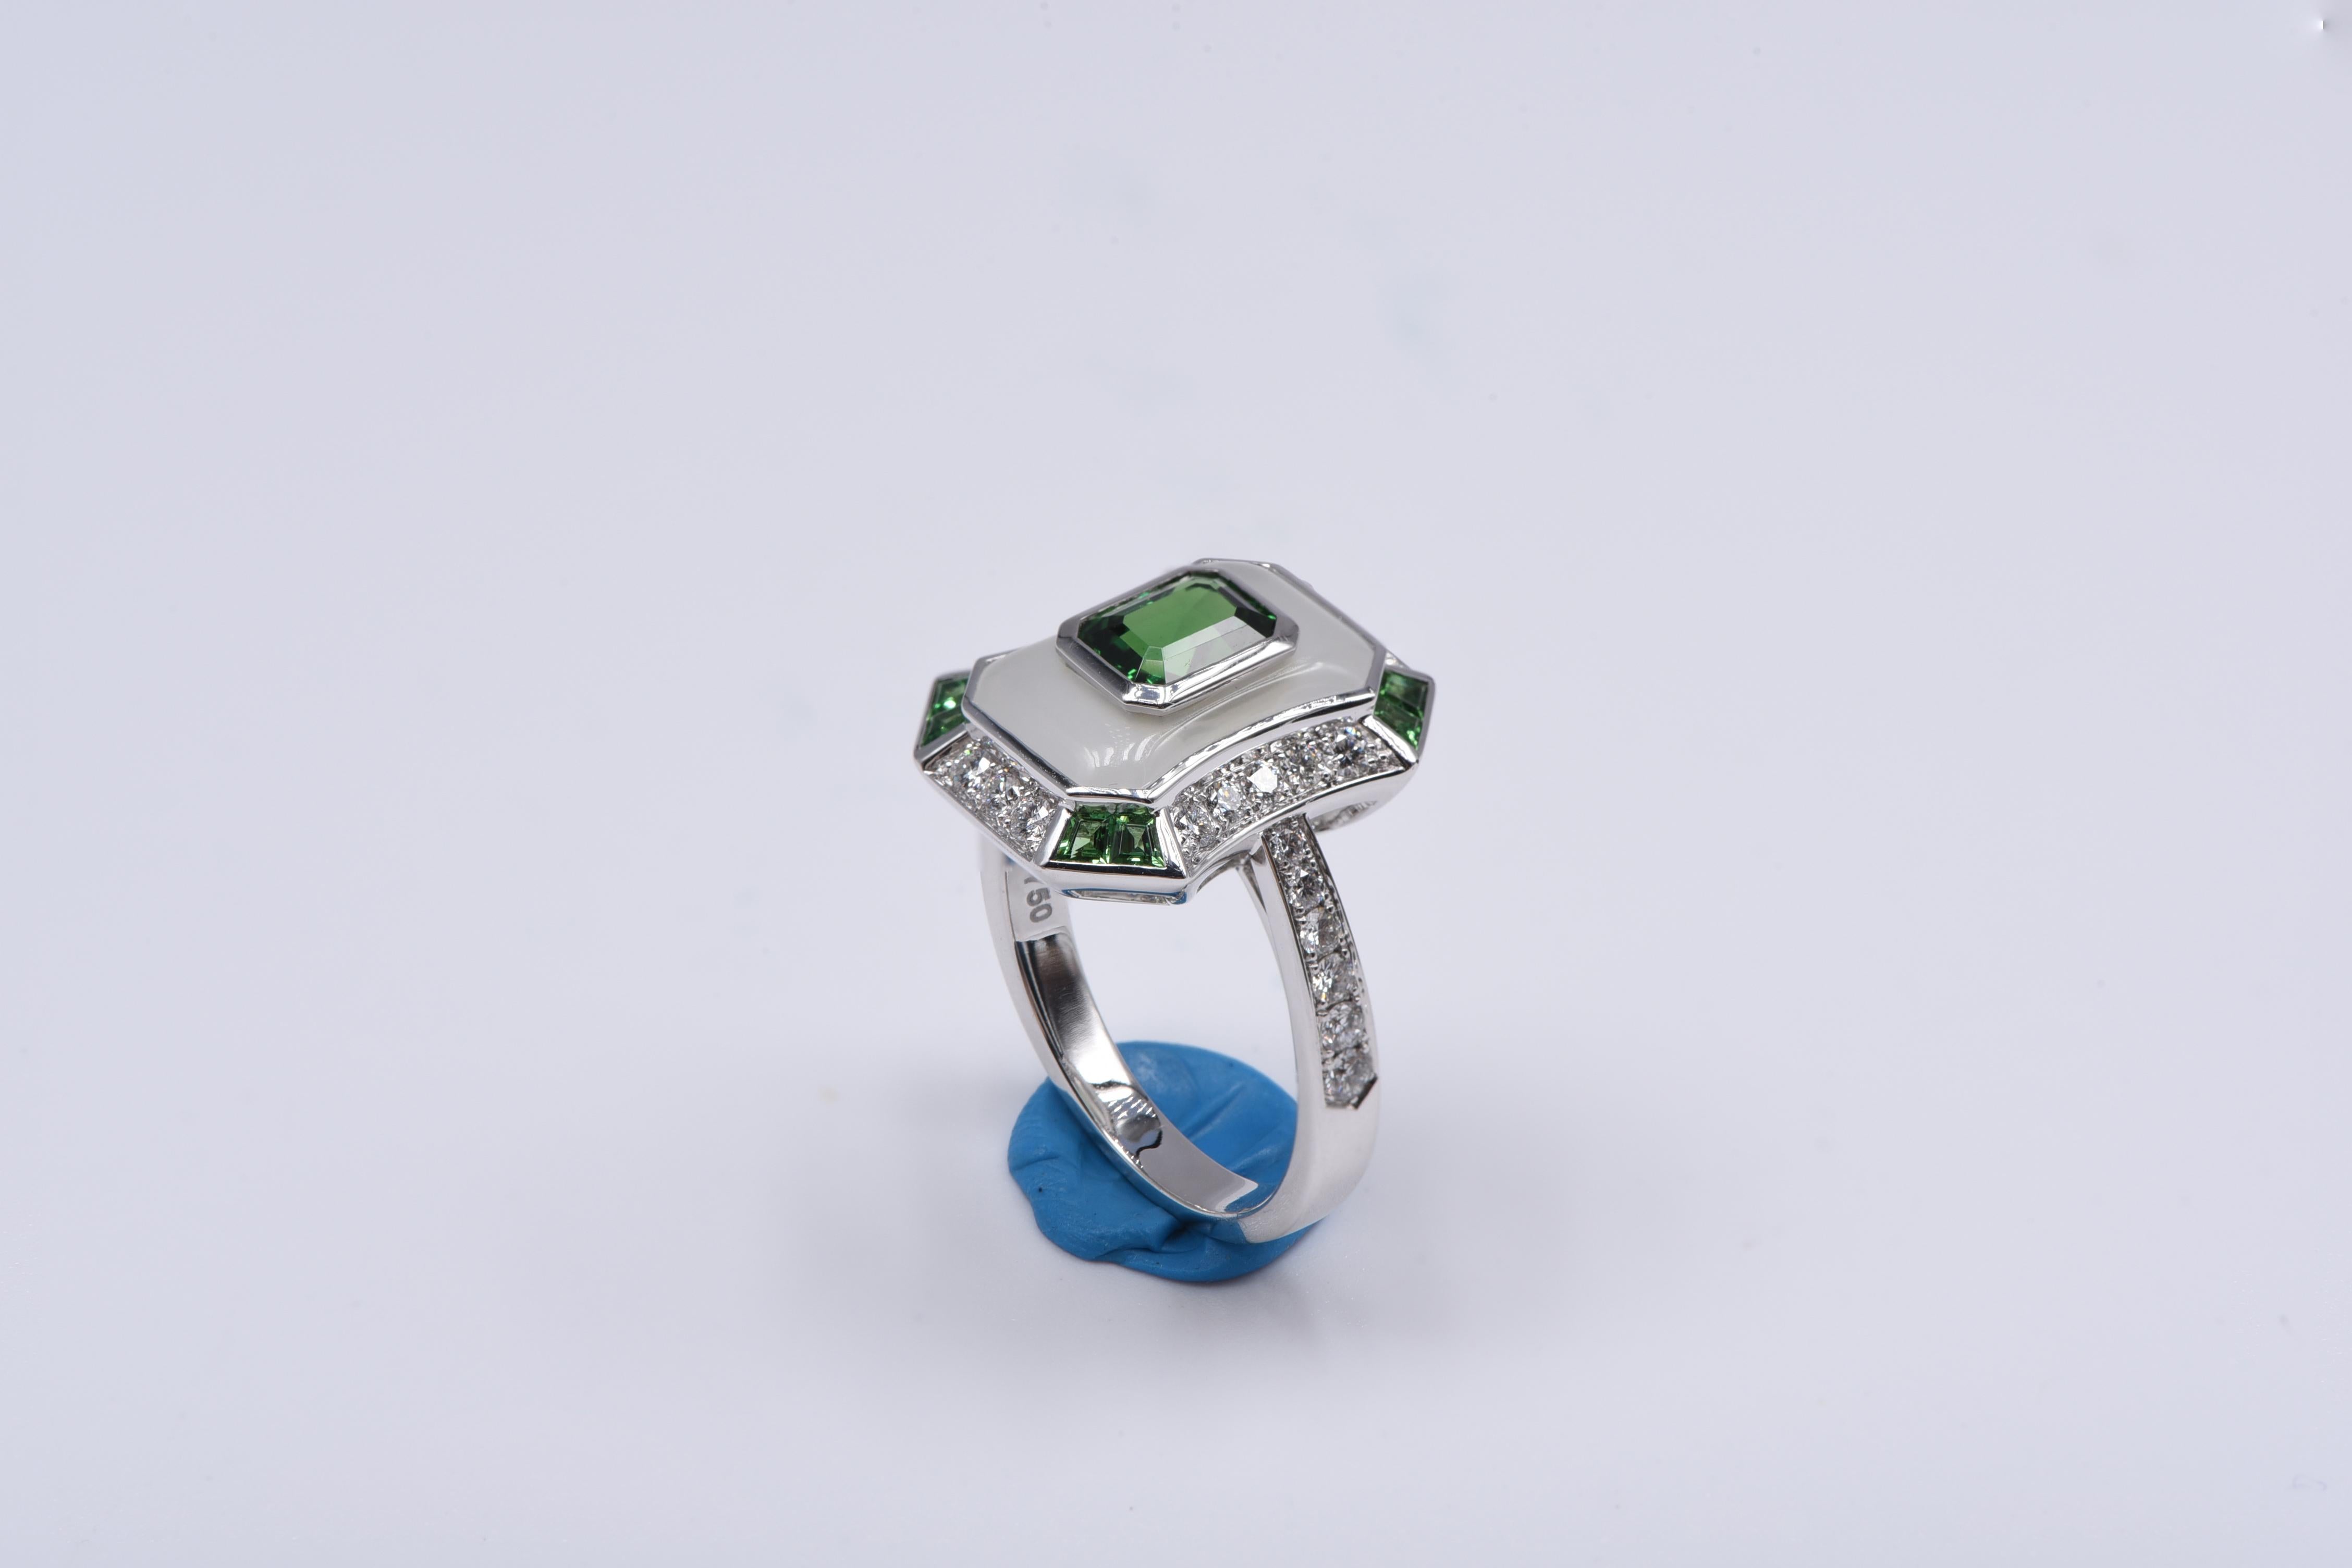 Ring in 18kt white gold with white diamonds (approx. 0.52 carats), tsavorite (approx. 1.20 carats) and milky quartz (approx. 3.75 carats)